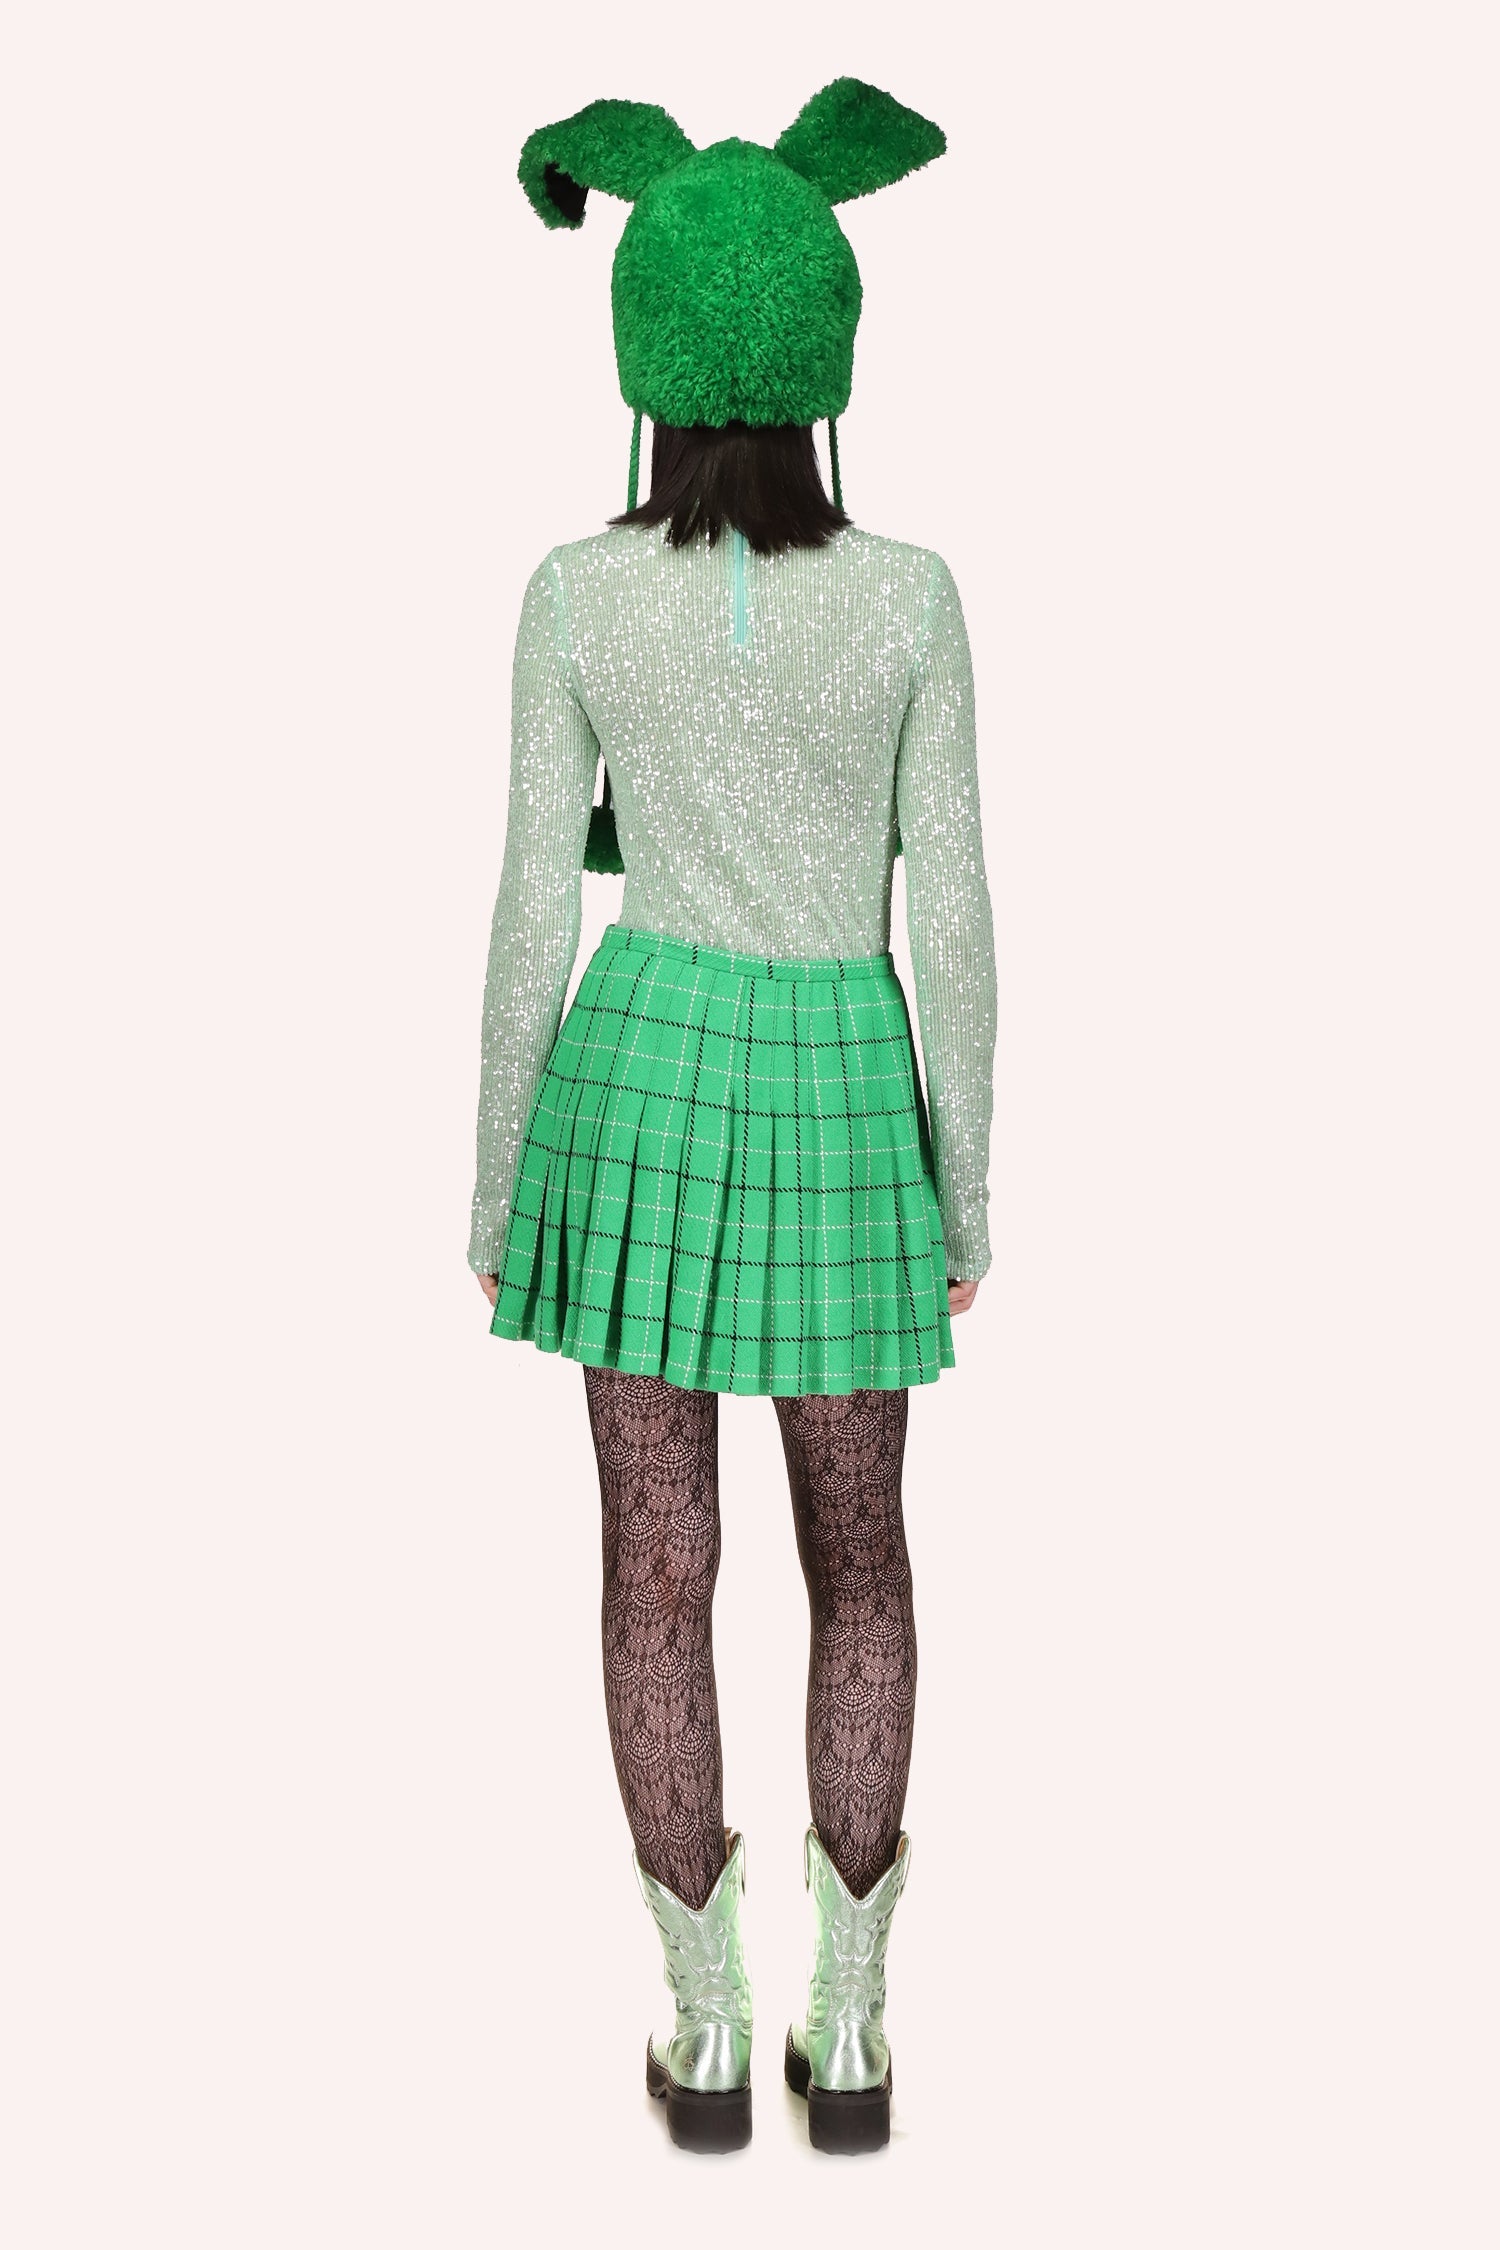 Sequin Mesh Peppermint, long sleeves, and turtleneck collar accentuates the neckline, hips long, zipper on the back